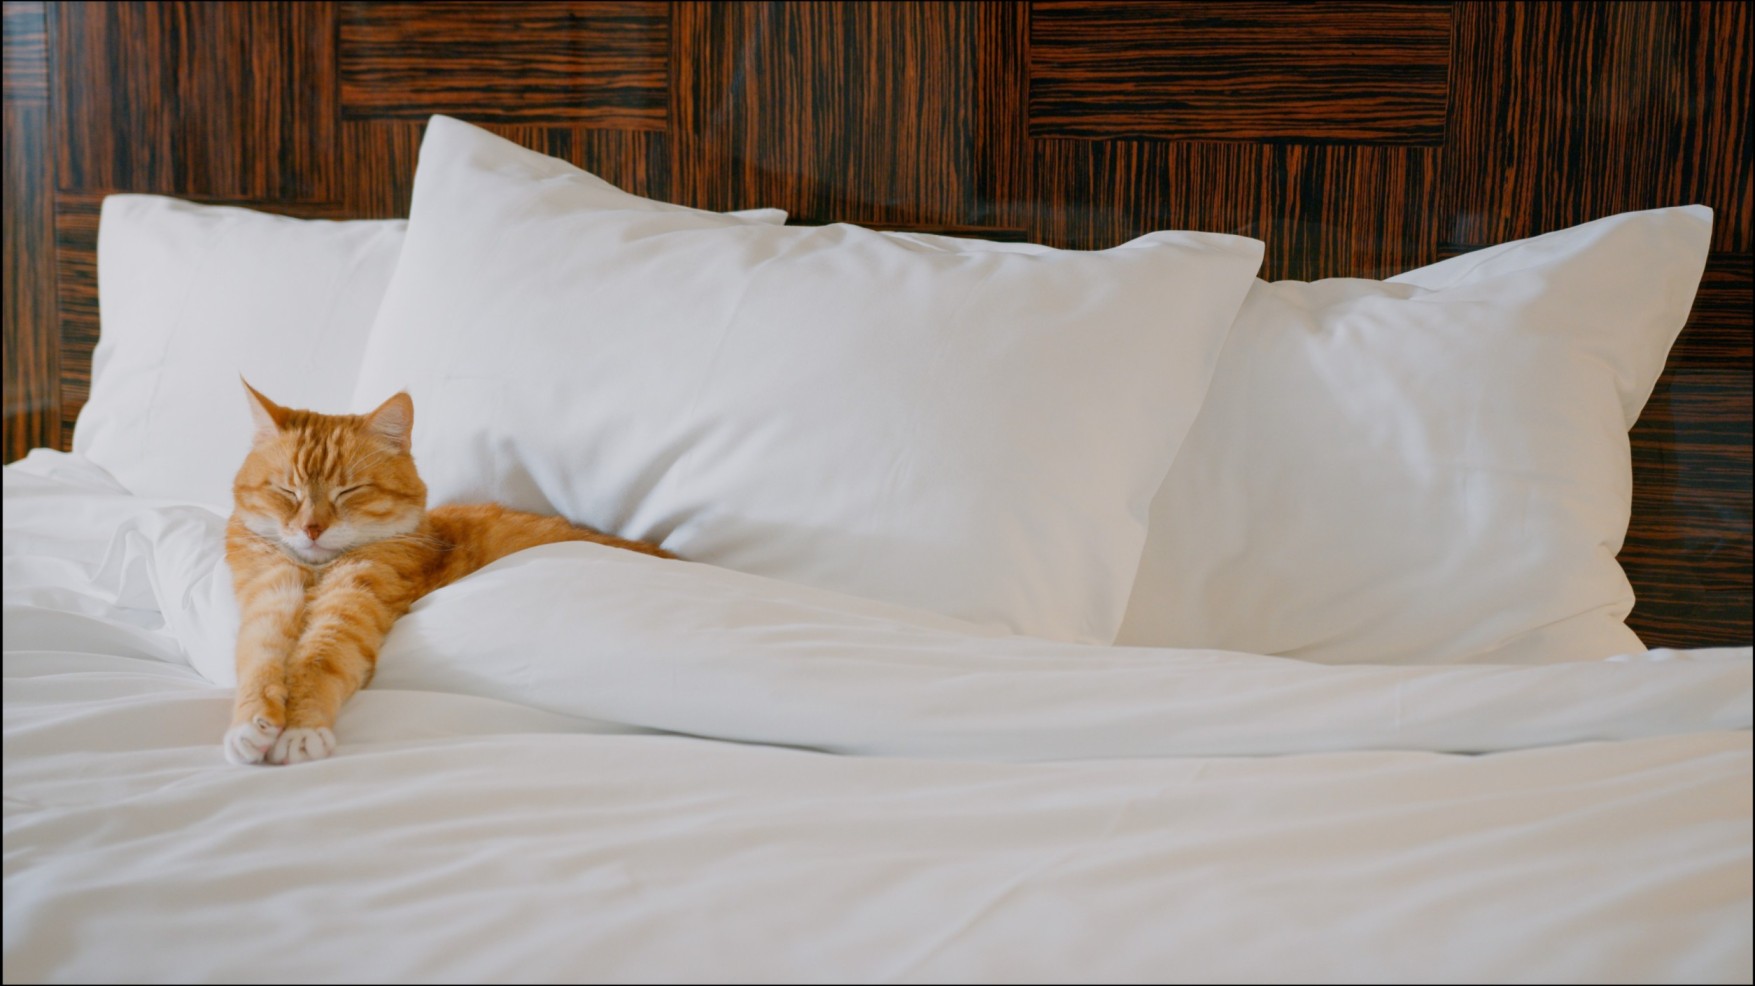 A cat nestling in a hotel bed full of pillows